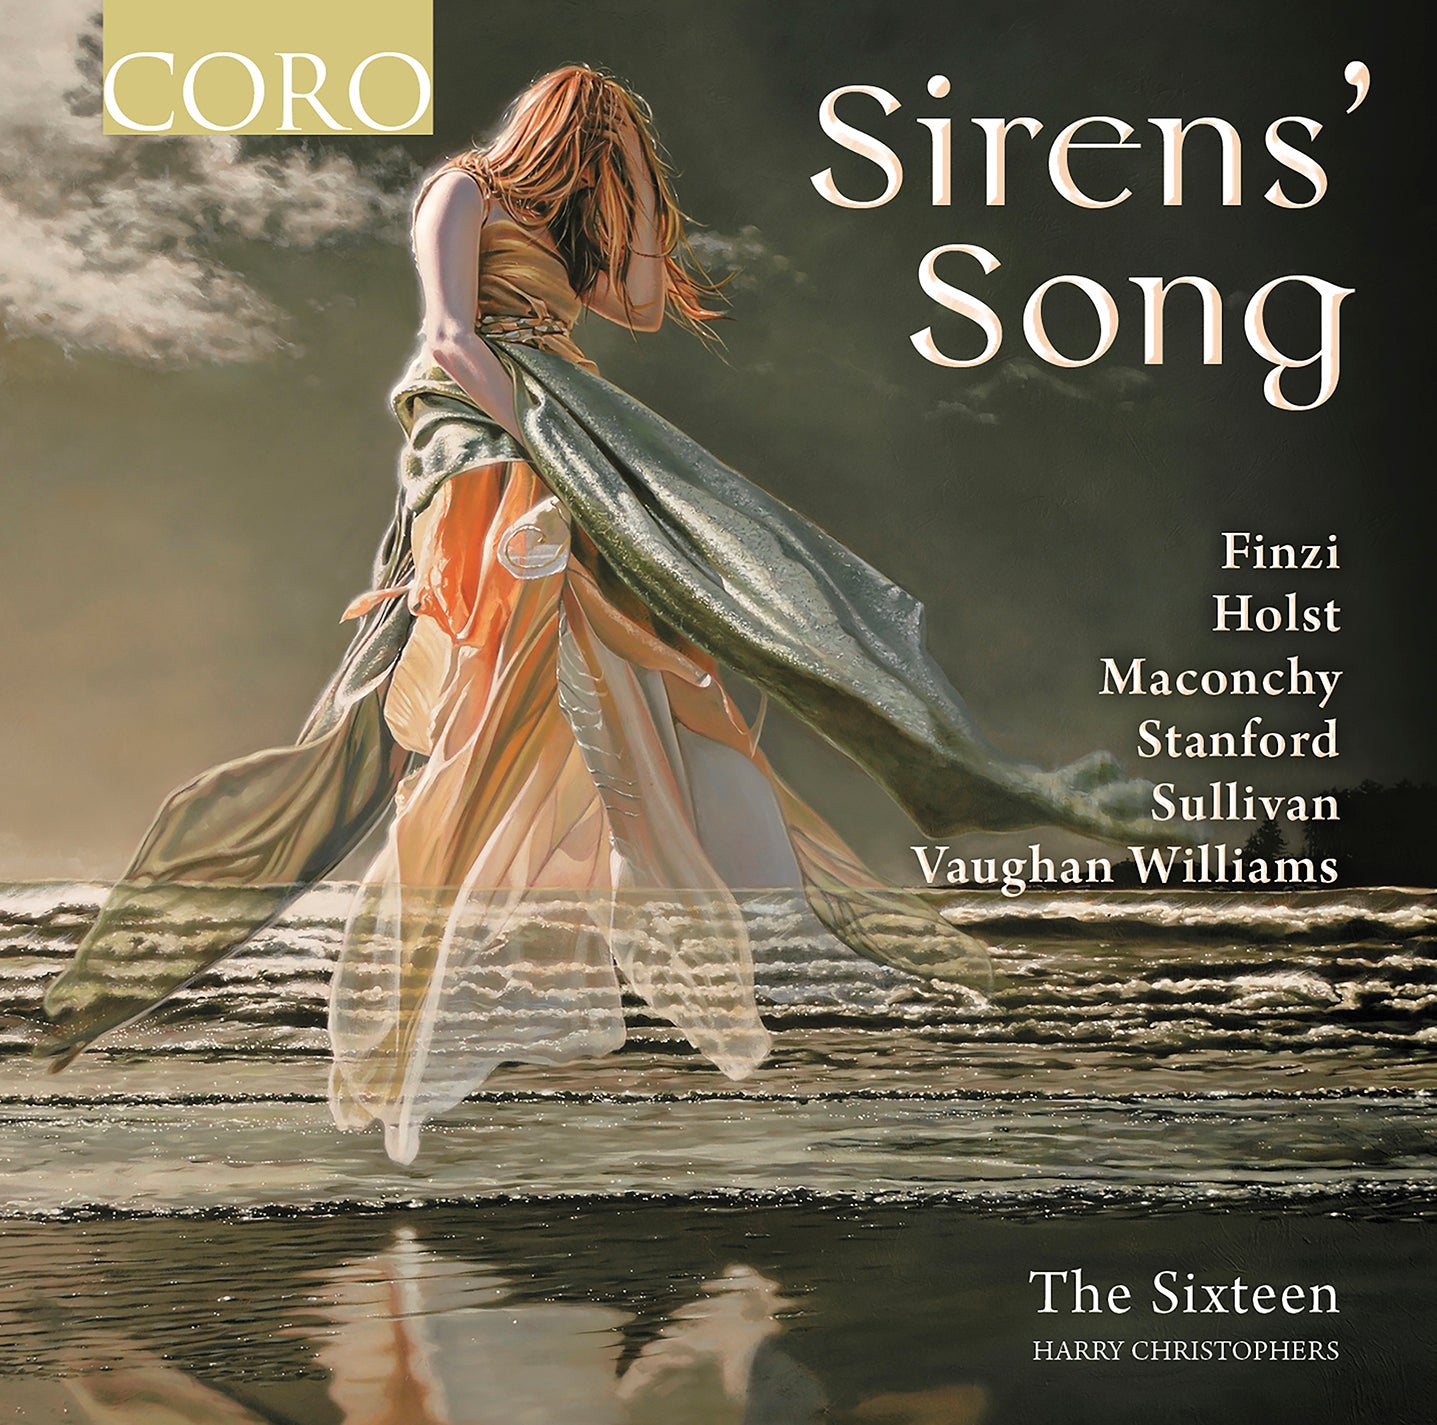 Sirens' Song / Christophers, The Sixteen